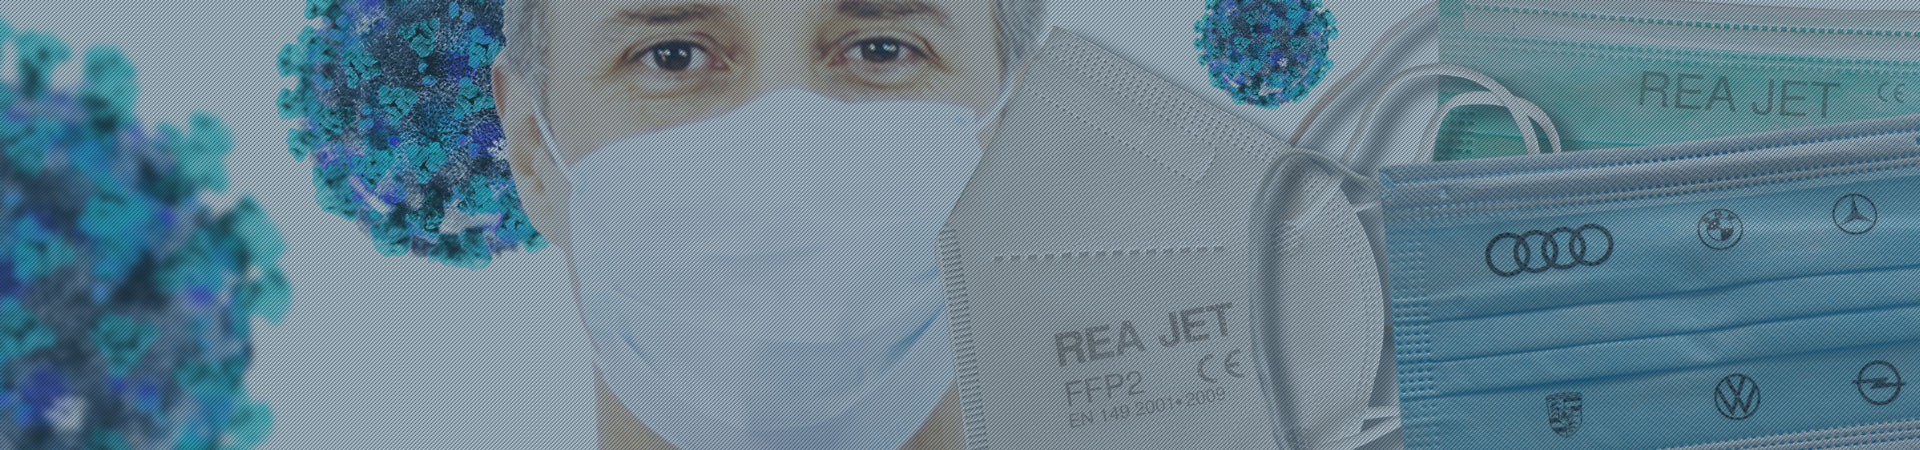 Respirator masks marking with CE marking, protection class and EU standard - REA JET HR